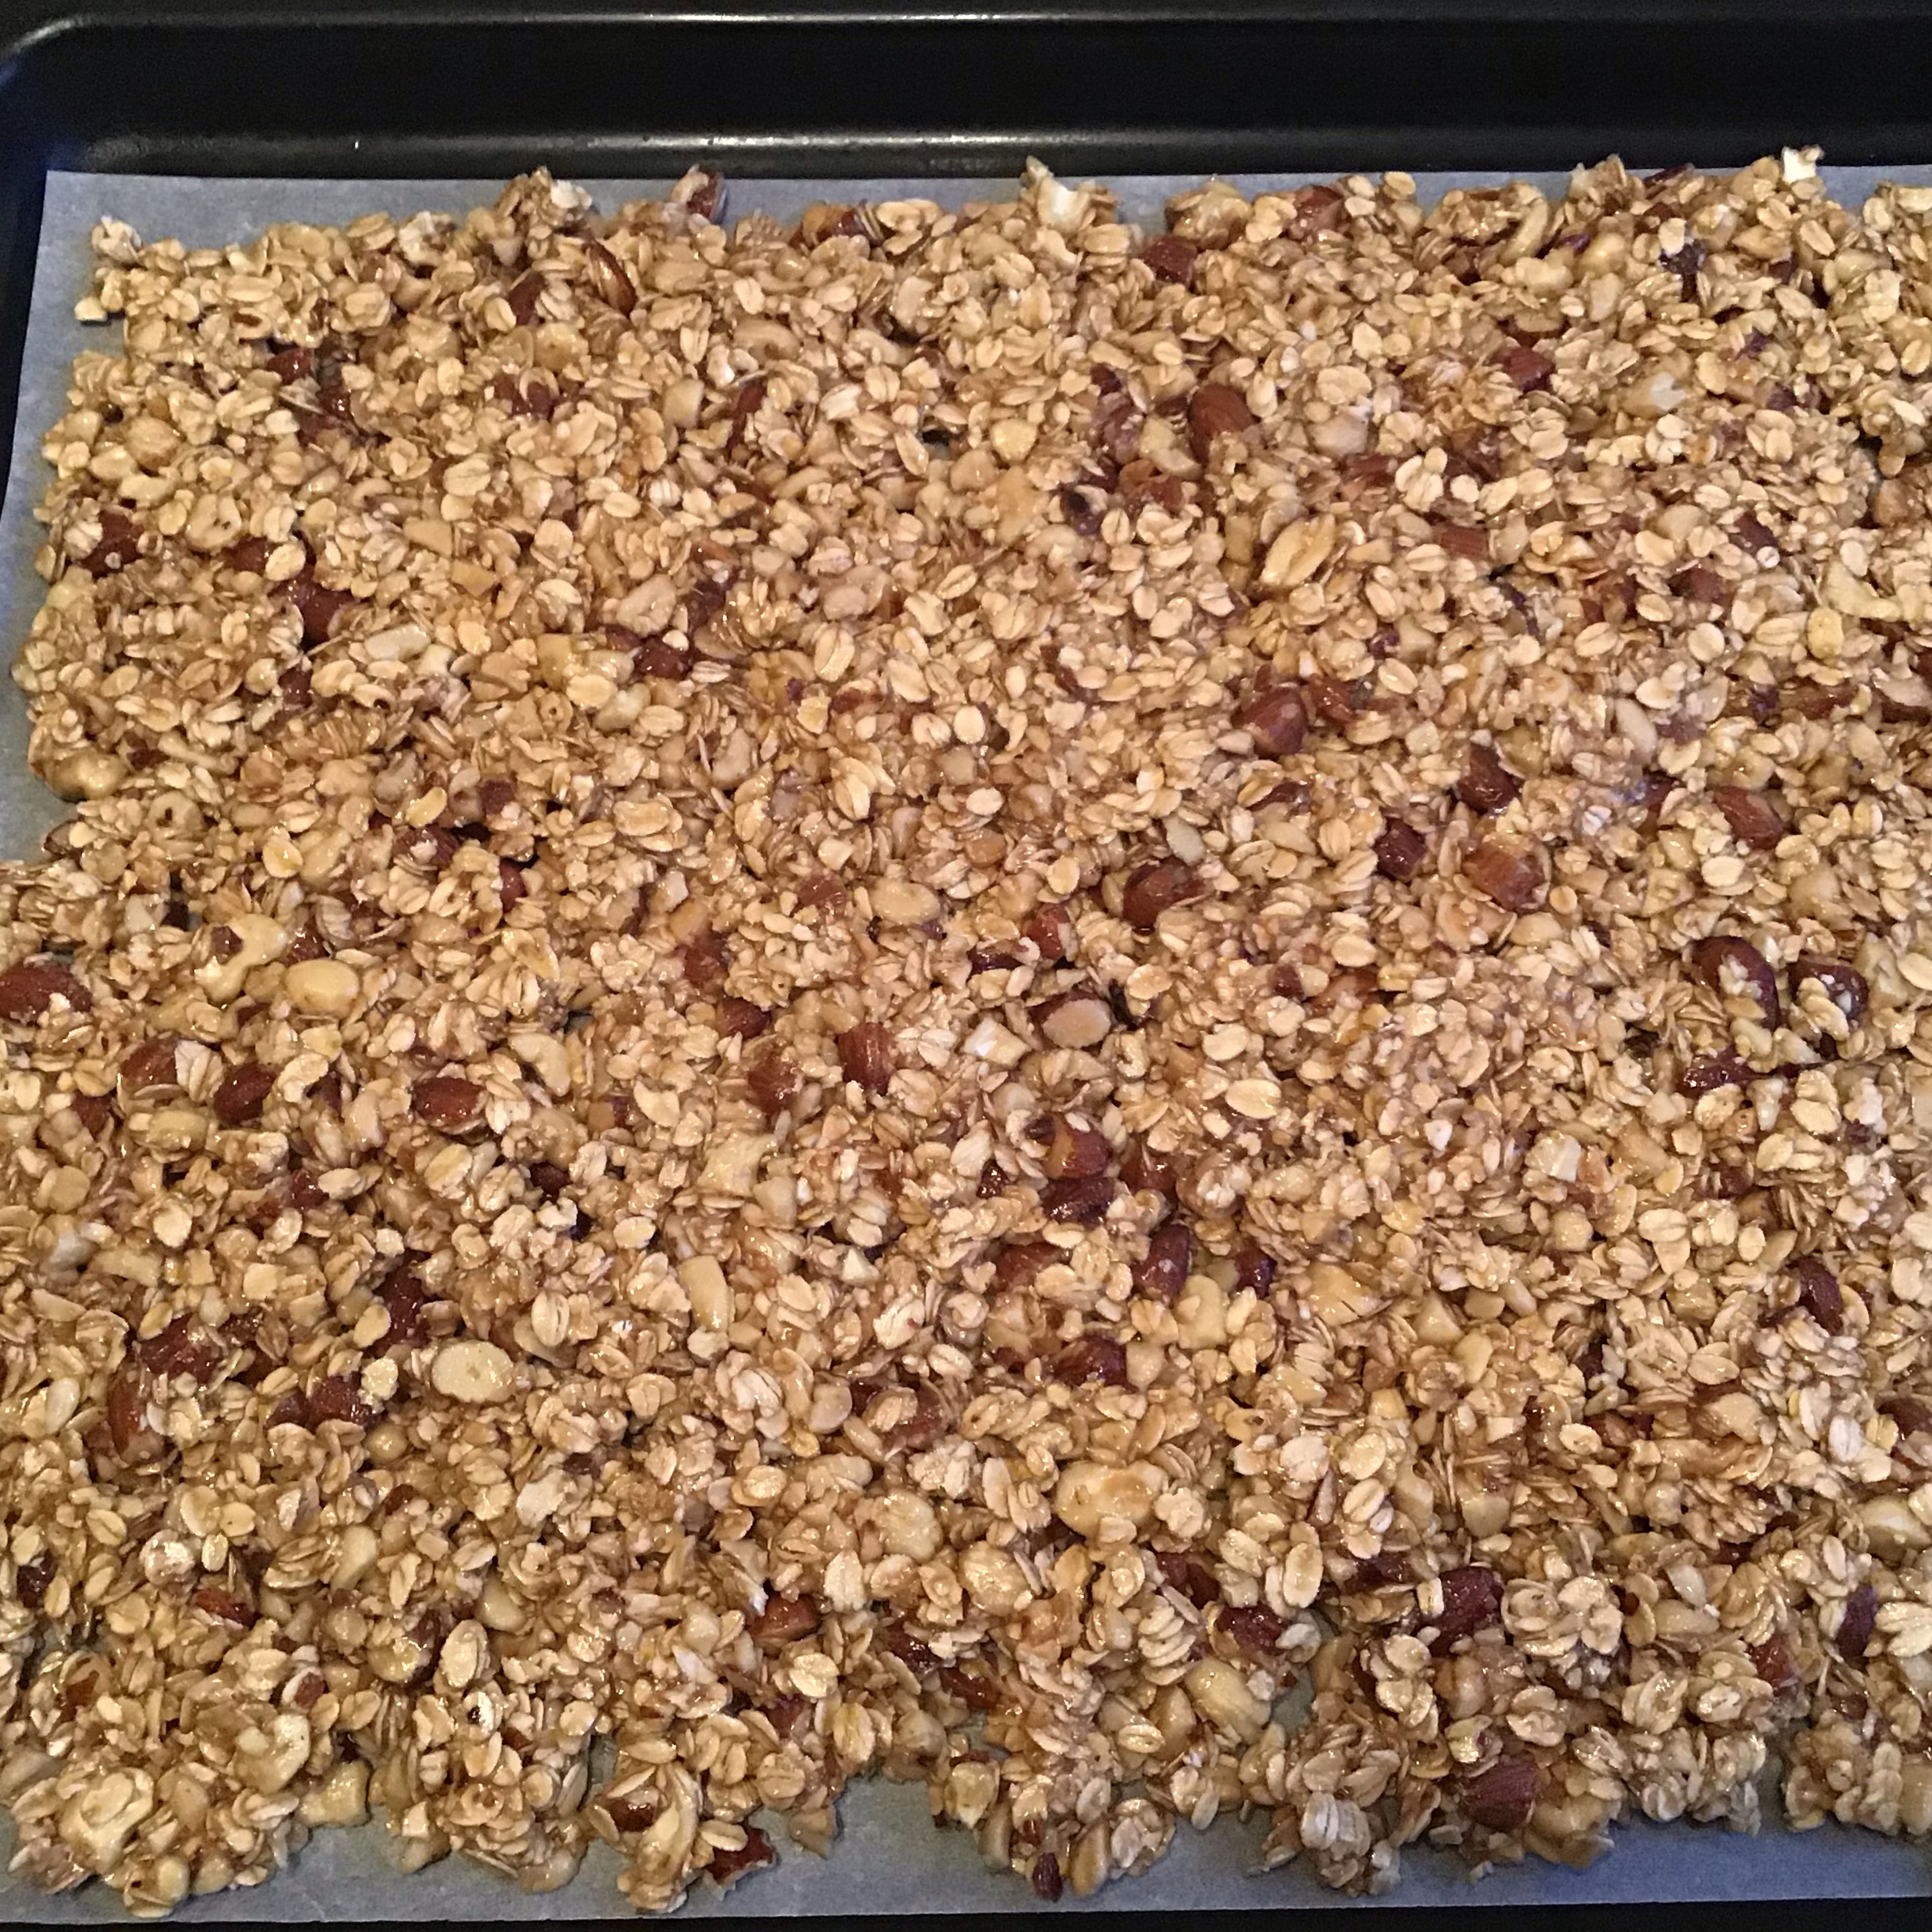 Pour the mixture on a baking sheet and level it